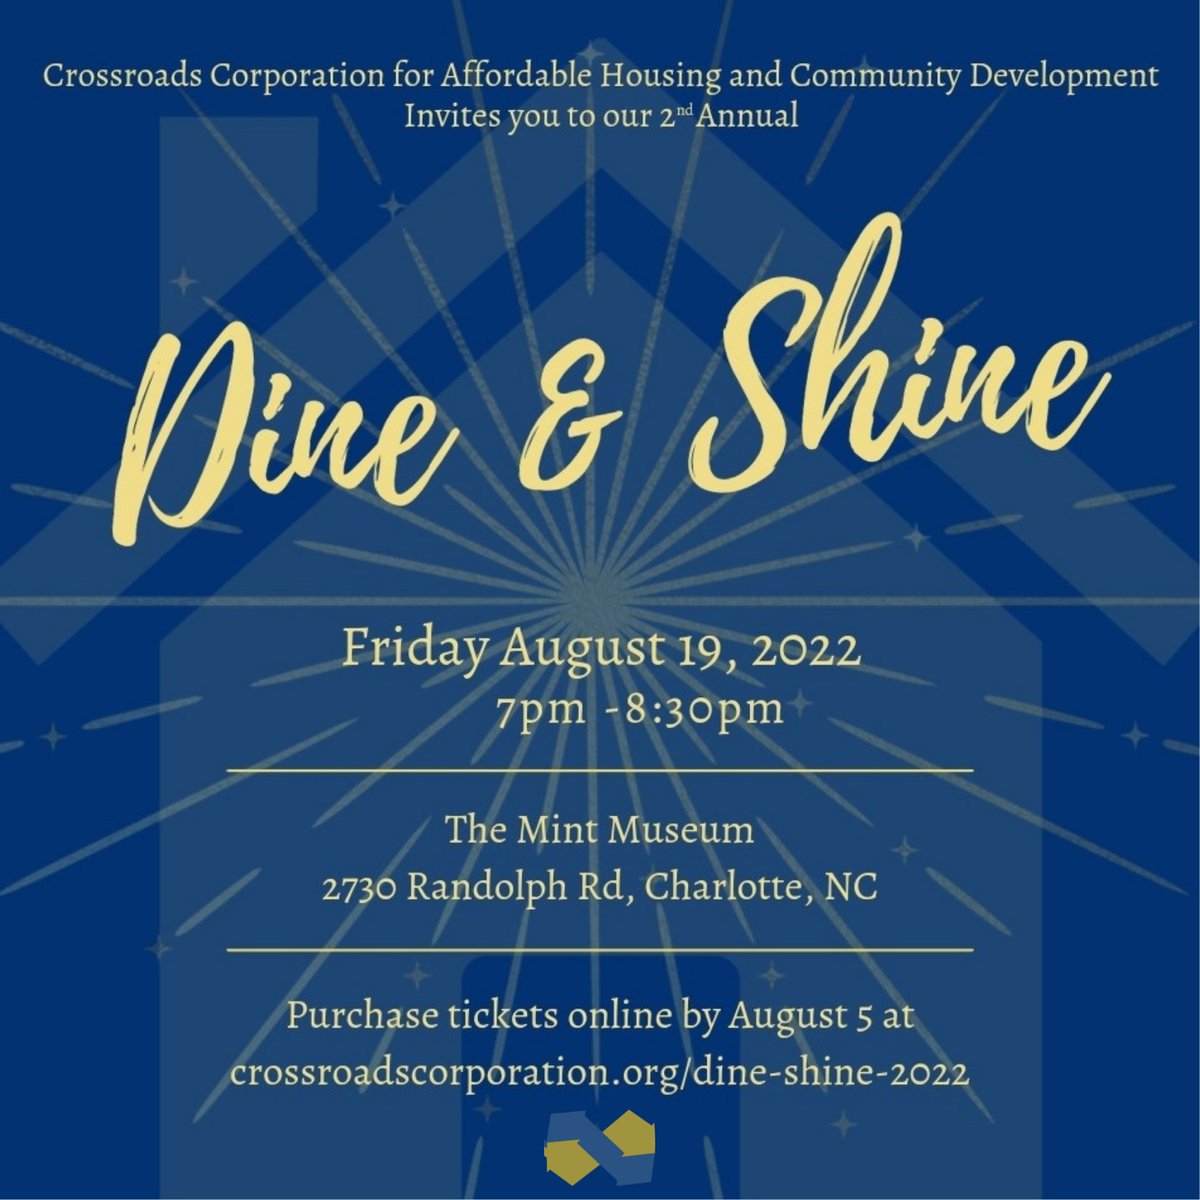 Crossroads Corporation for Affordable Housing and Community Development invites you to our 2nd Annual Dine & Shine. Purchase tickets online by August 5, 2022.